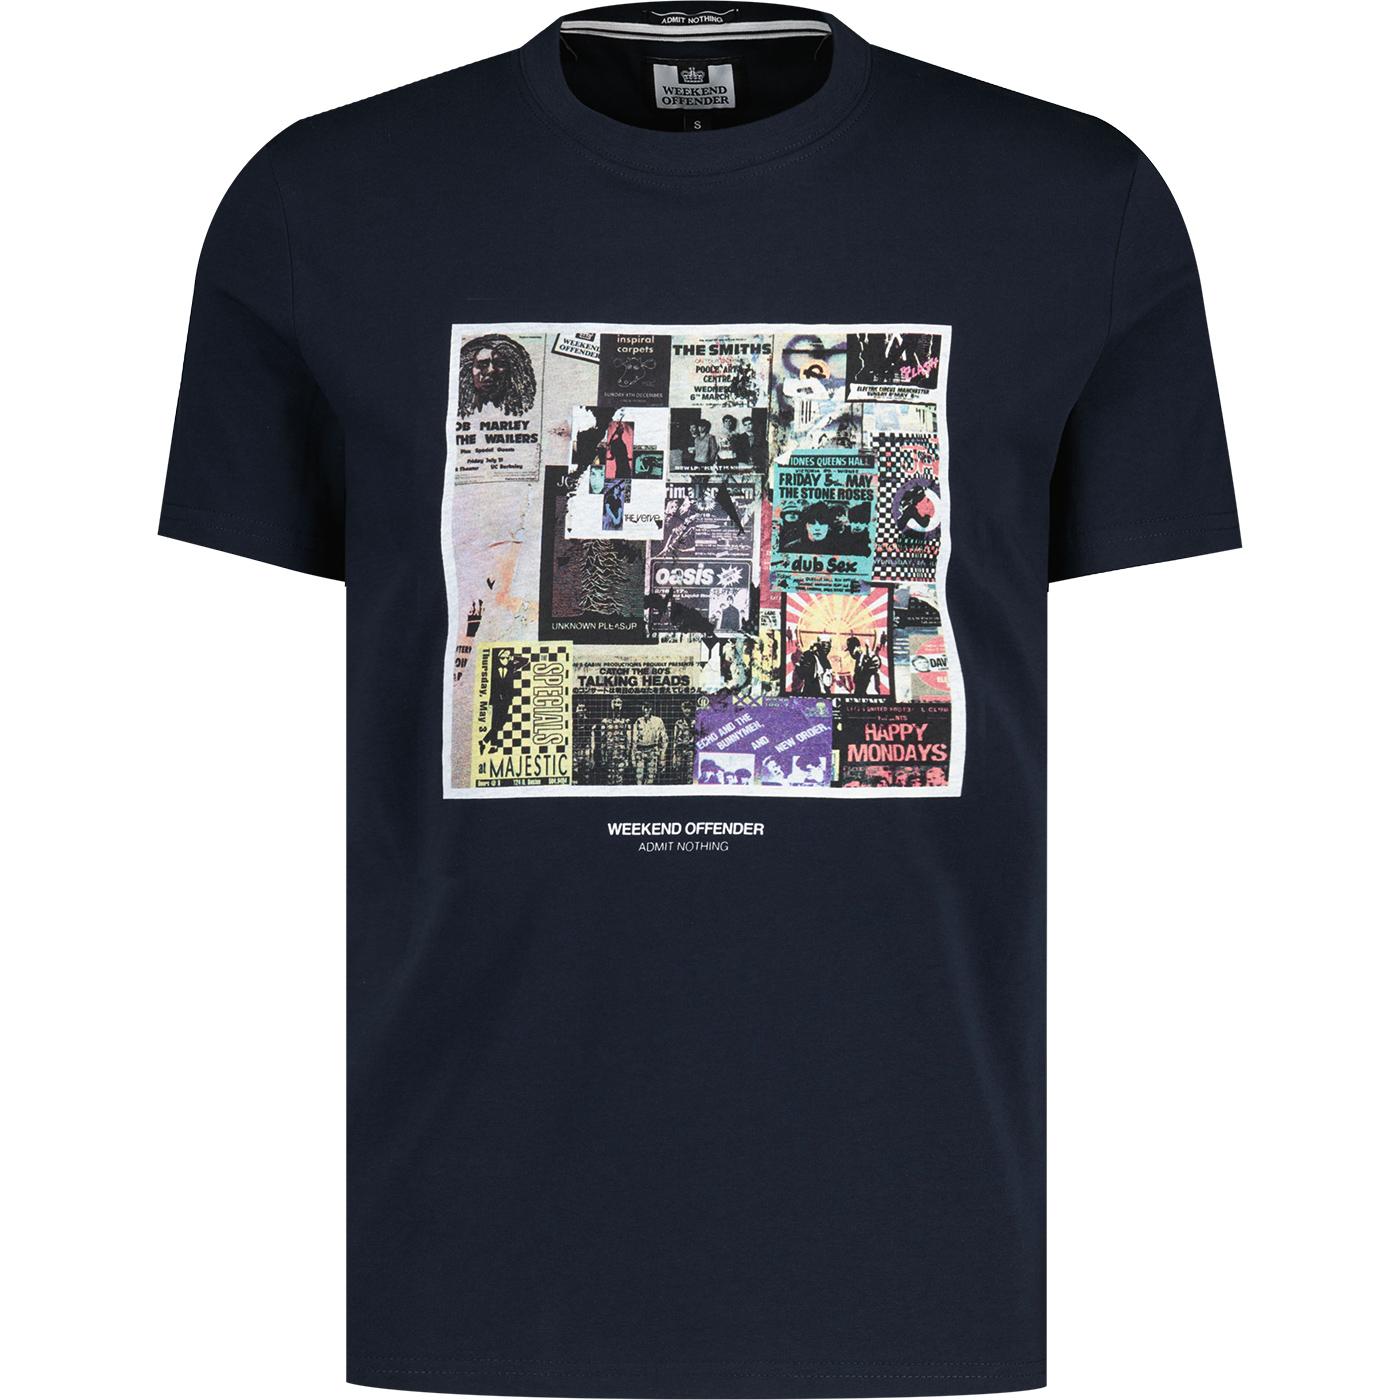 Weekend Offender Posters Retro 90s Graphic Print T-shirt Navy